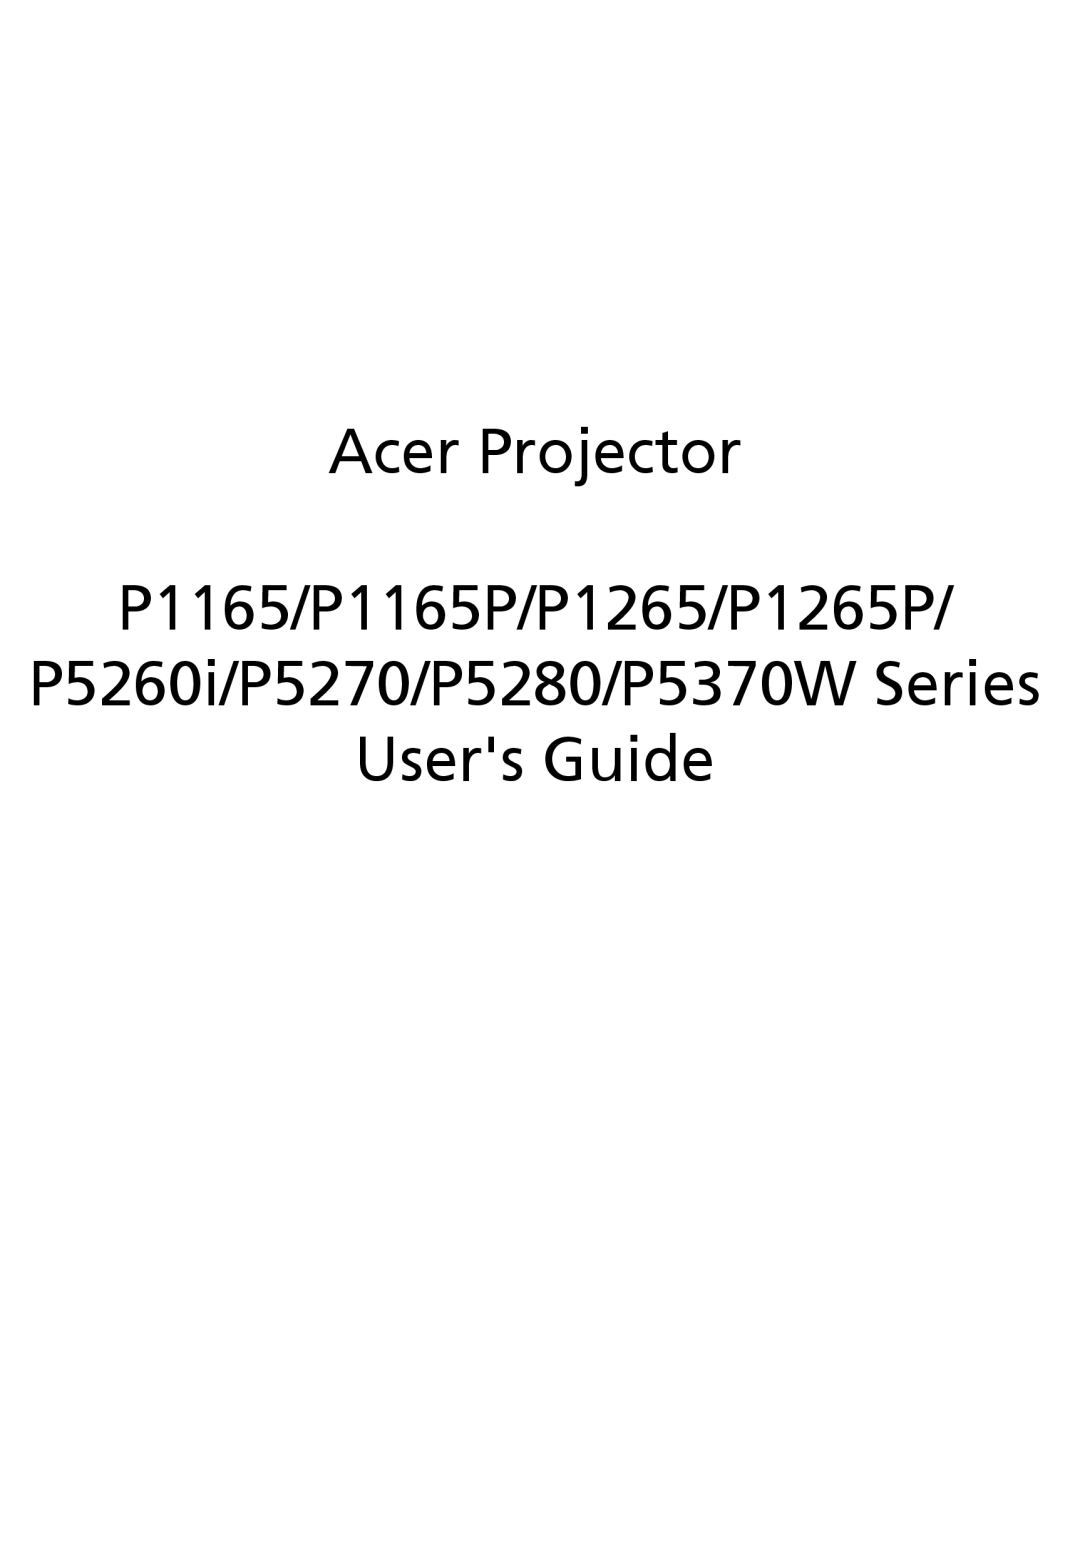 Acer manual Acer Projector P1165/P1265/P5270 Series Users Guide 